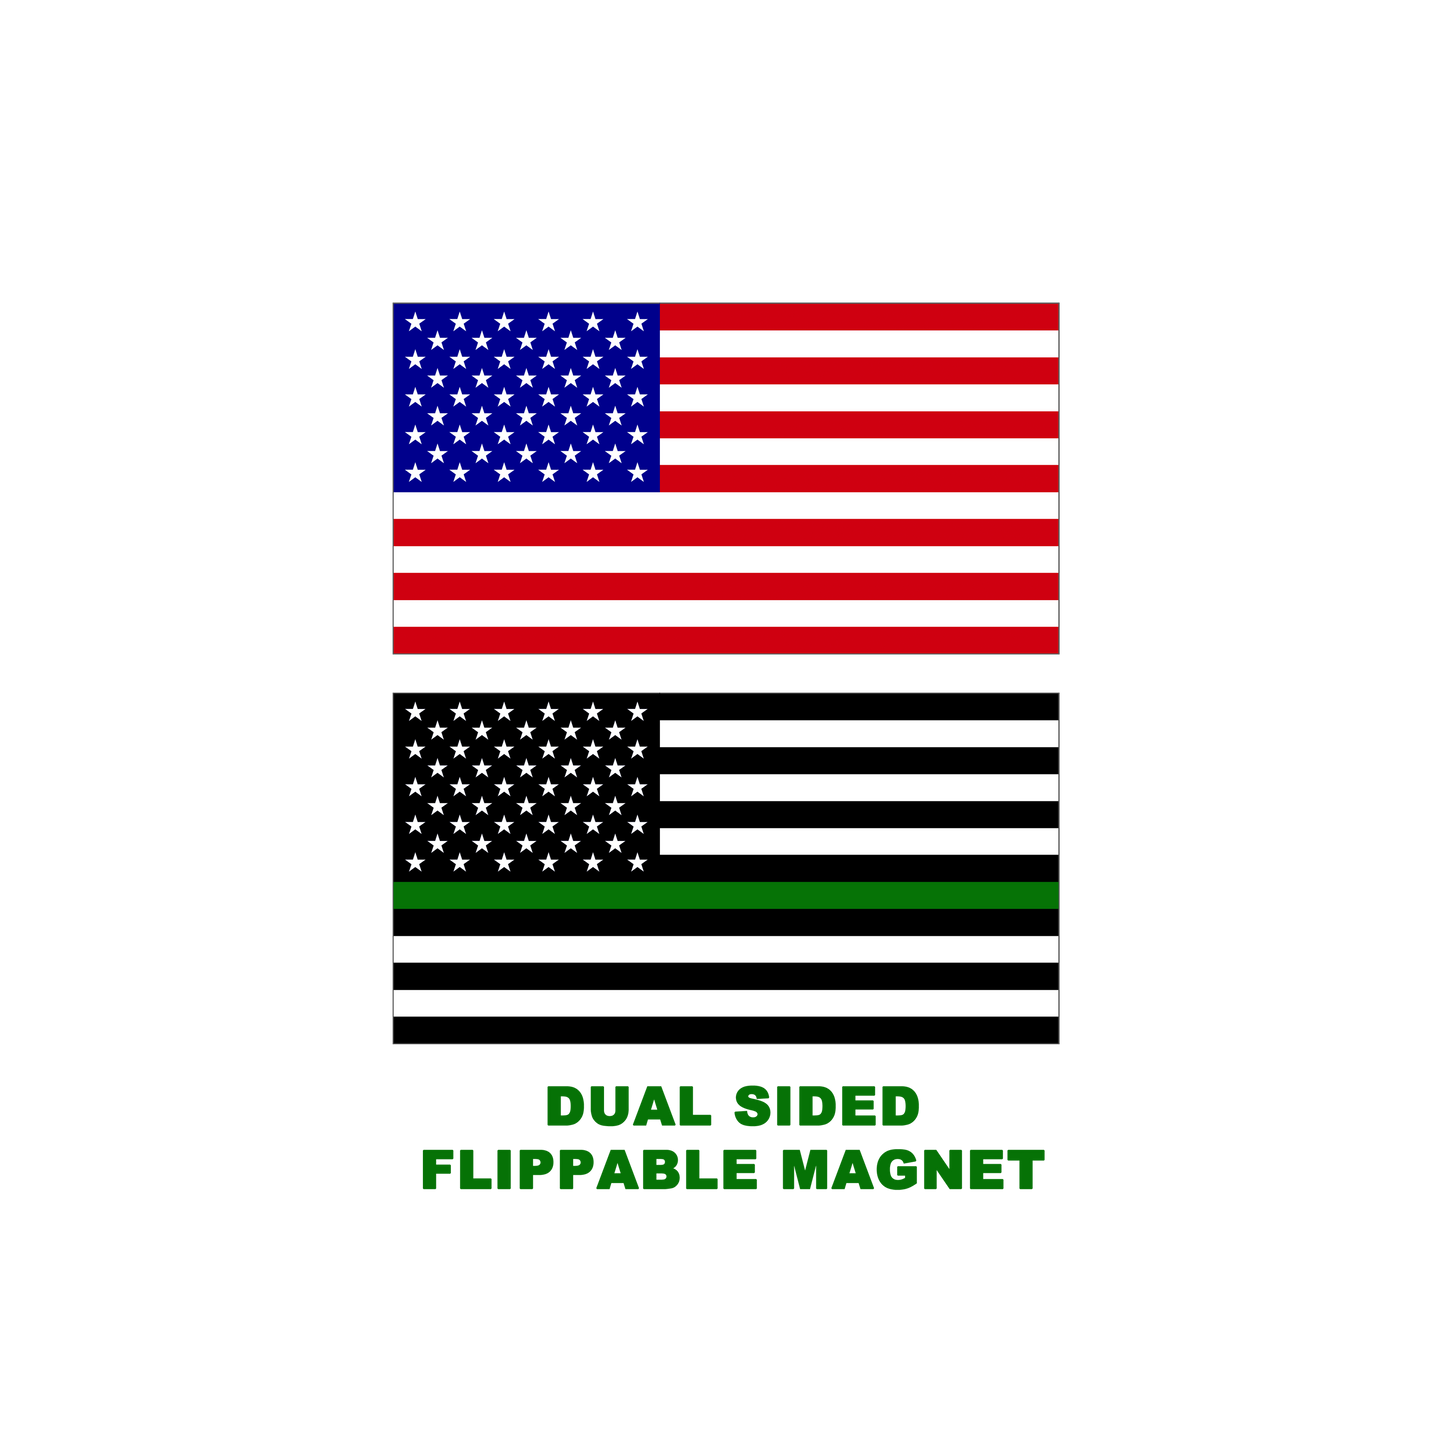 E-019 Thin Green Line 2 sided reversible magnet - Border Patrol, Army, Police, Sheriff